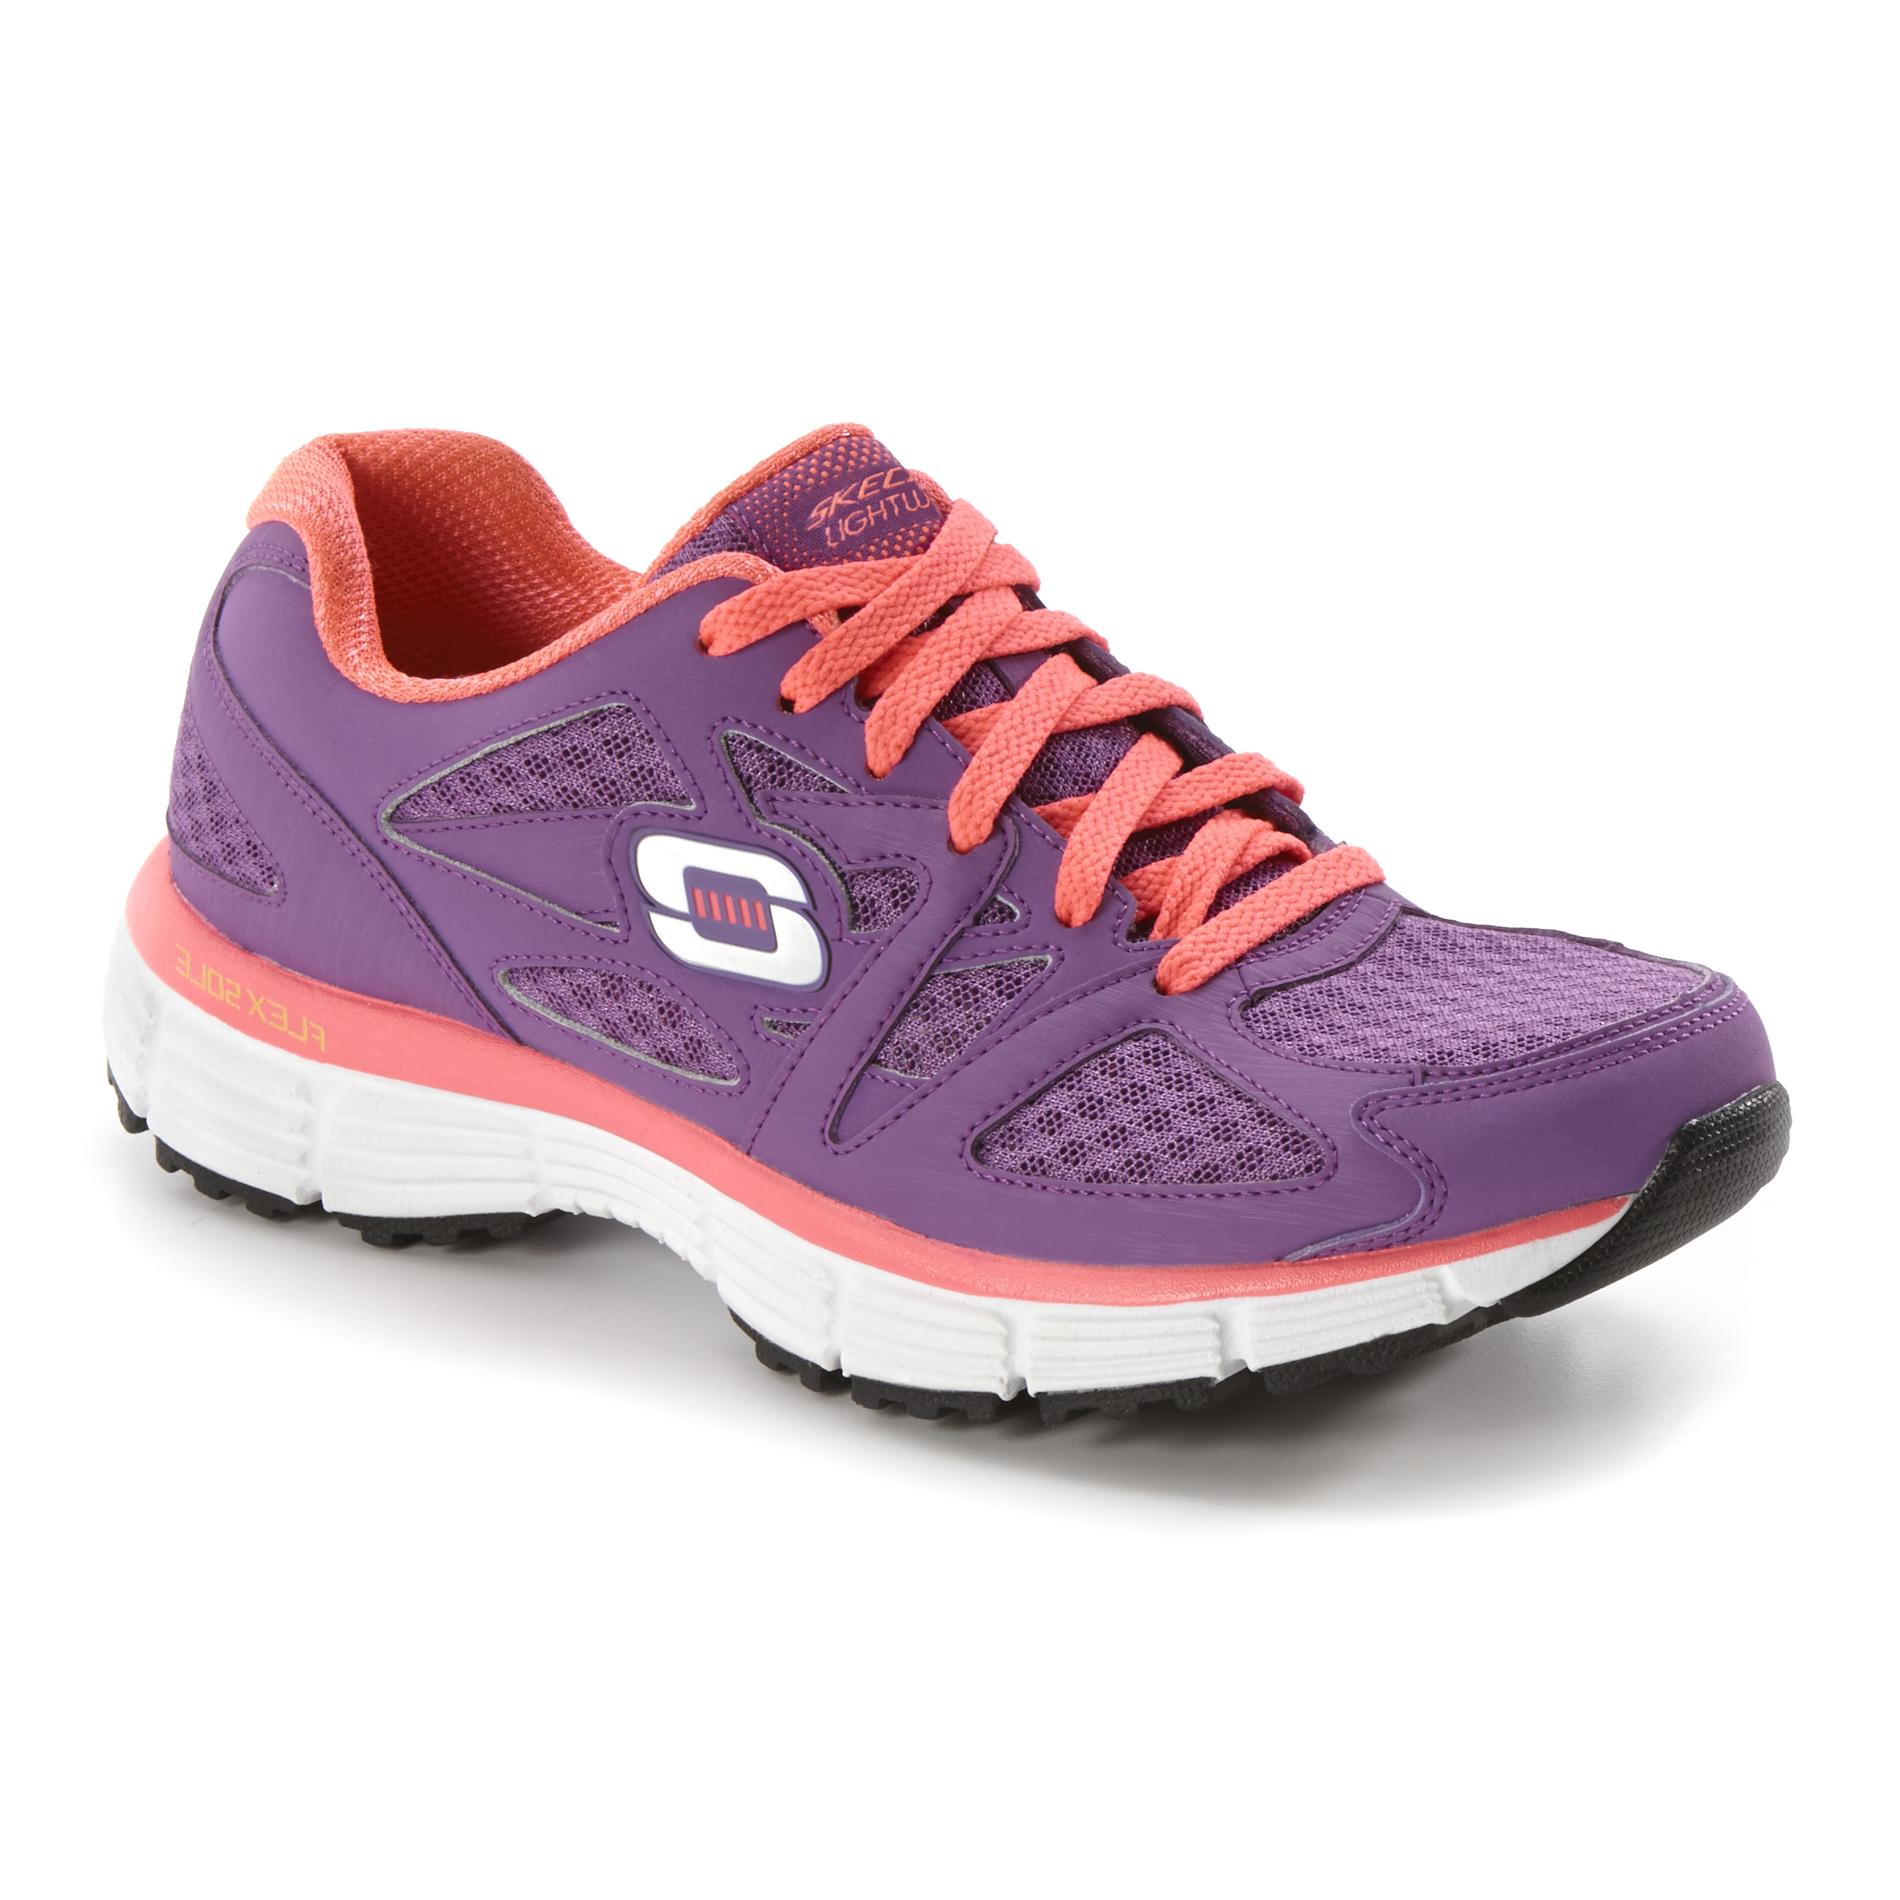 Skechers Women's Free Time Running Athletic Shoe - Purple/Coral